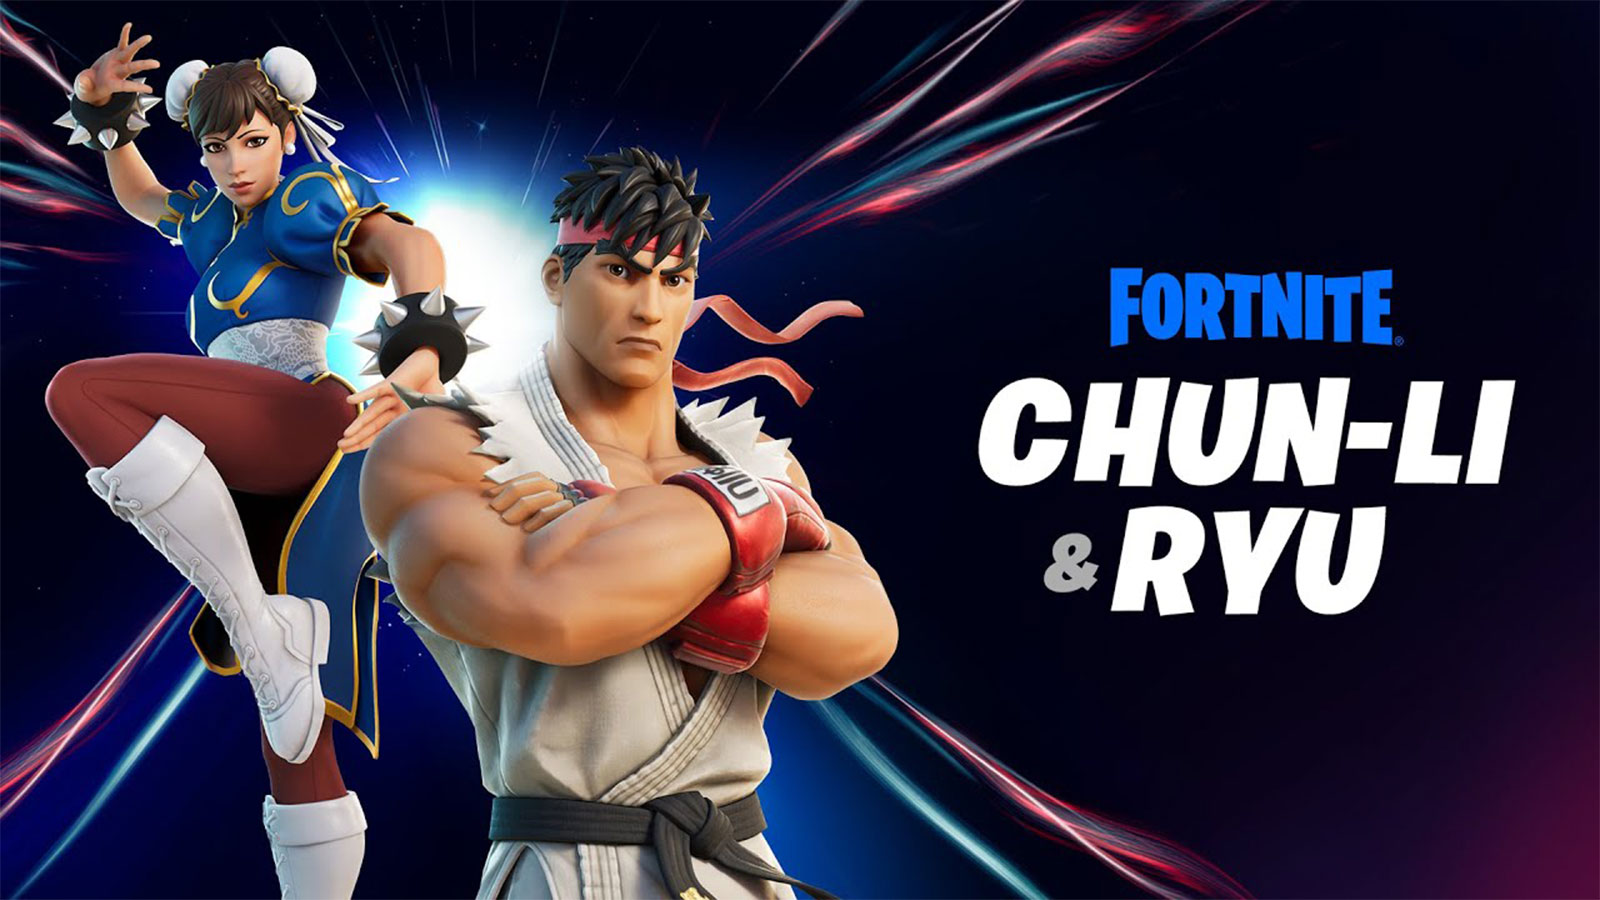 How to get Street Fighter's Ryu and Chun-Li in Fortnite - Dexerto